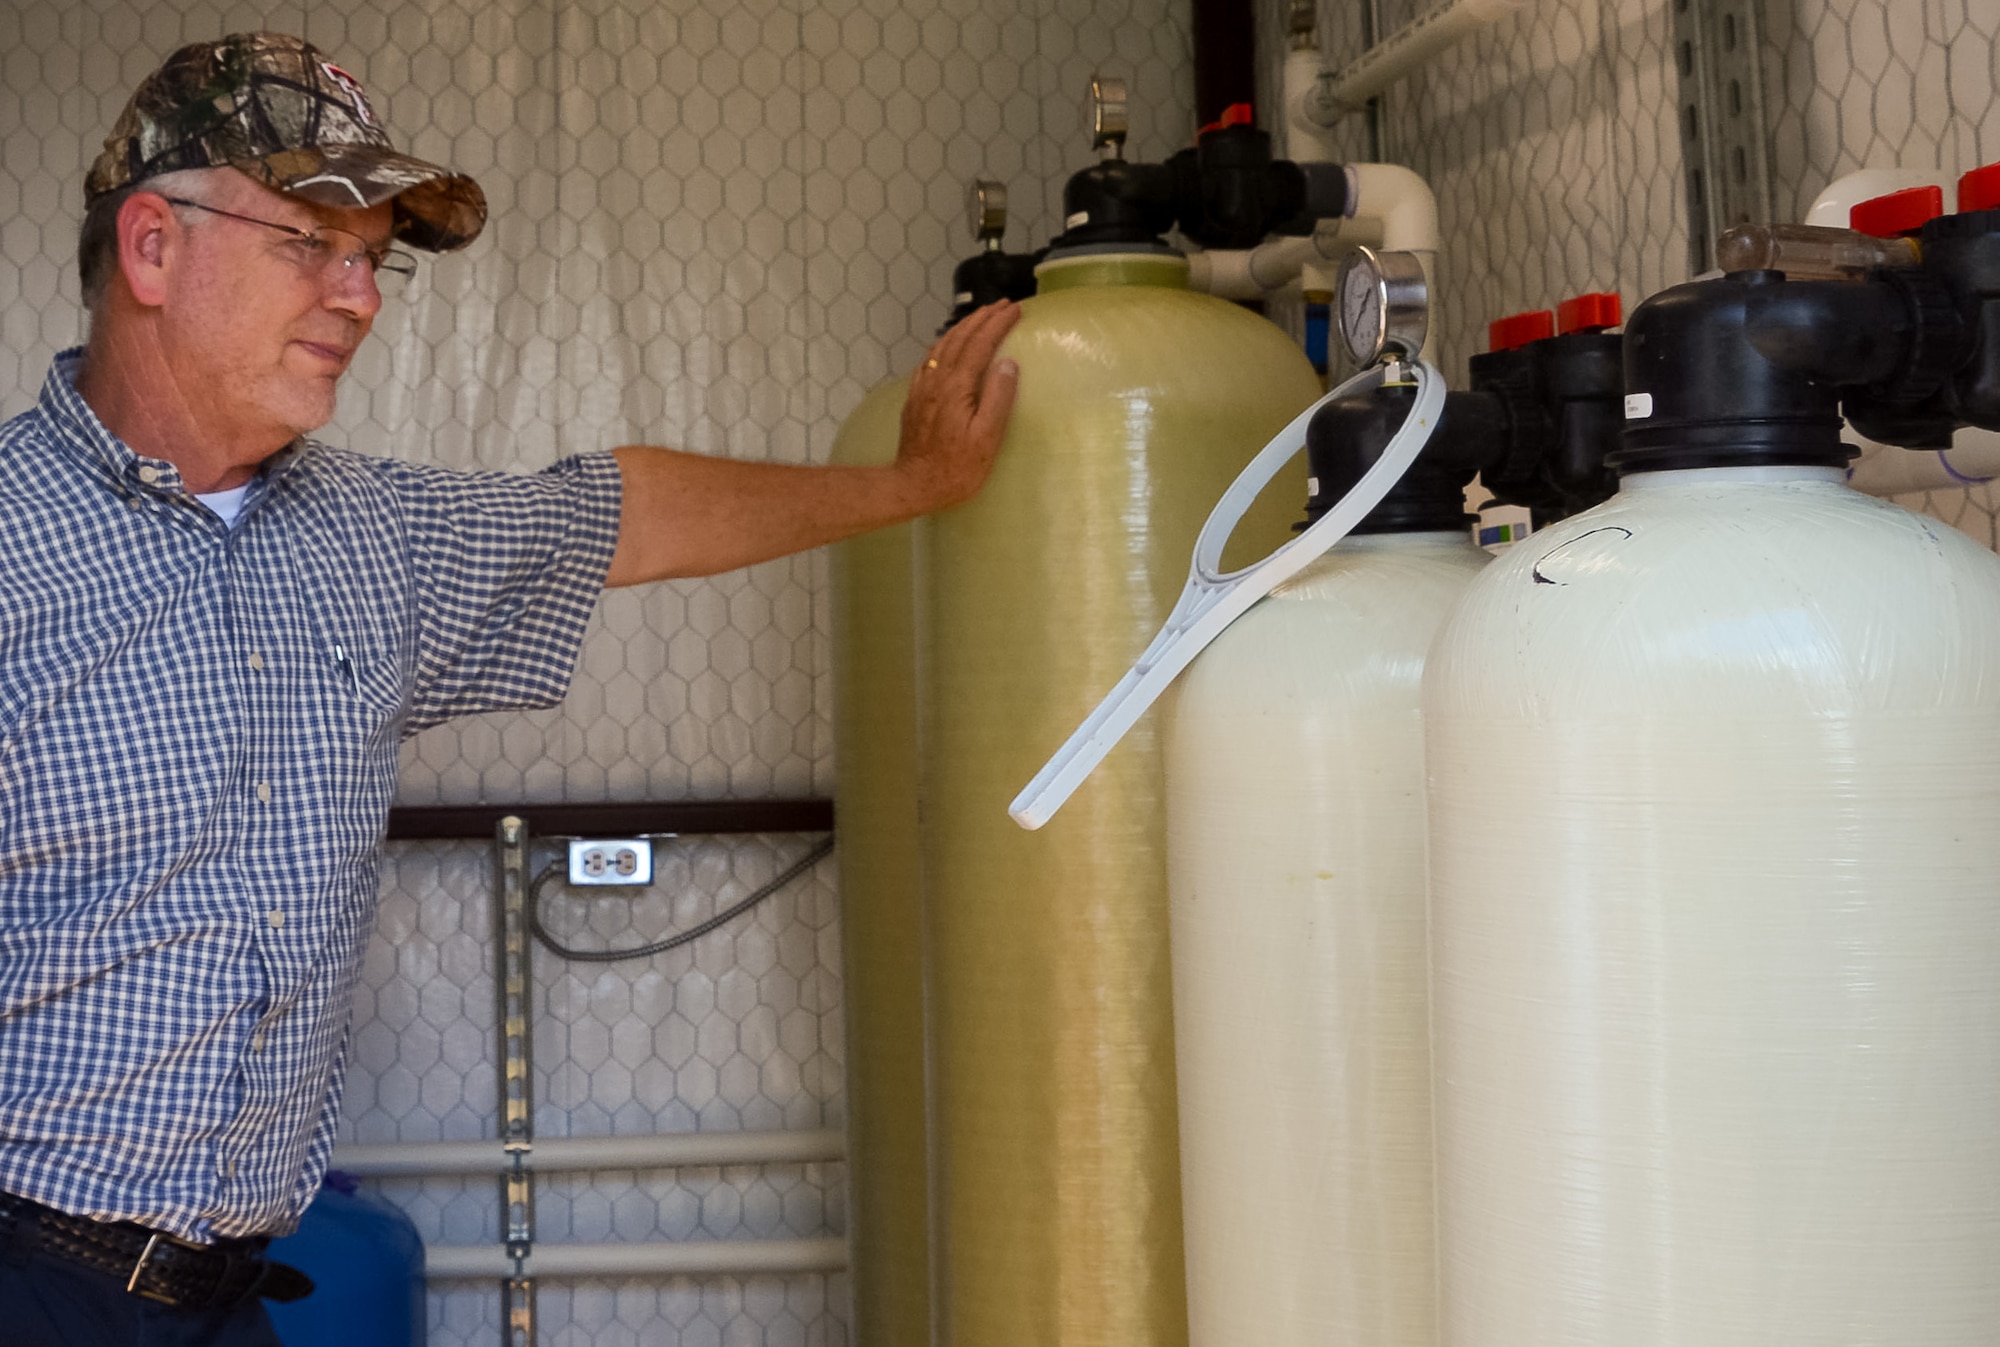 Paul Carroll, a program manager at the Air Force BRAC program, inspects a whole-house treatment system installed at a home near the former Reese Air Force Base in Lubbock, Texas, Aug. 22, 2018. The system is designed to remove PFAS from the home owners drinking water well. (U.S. Air Force courtesy photo)